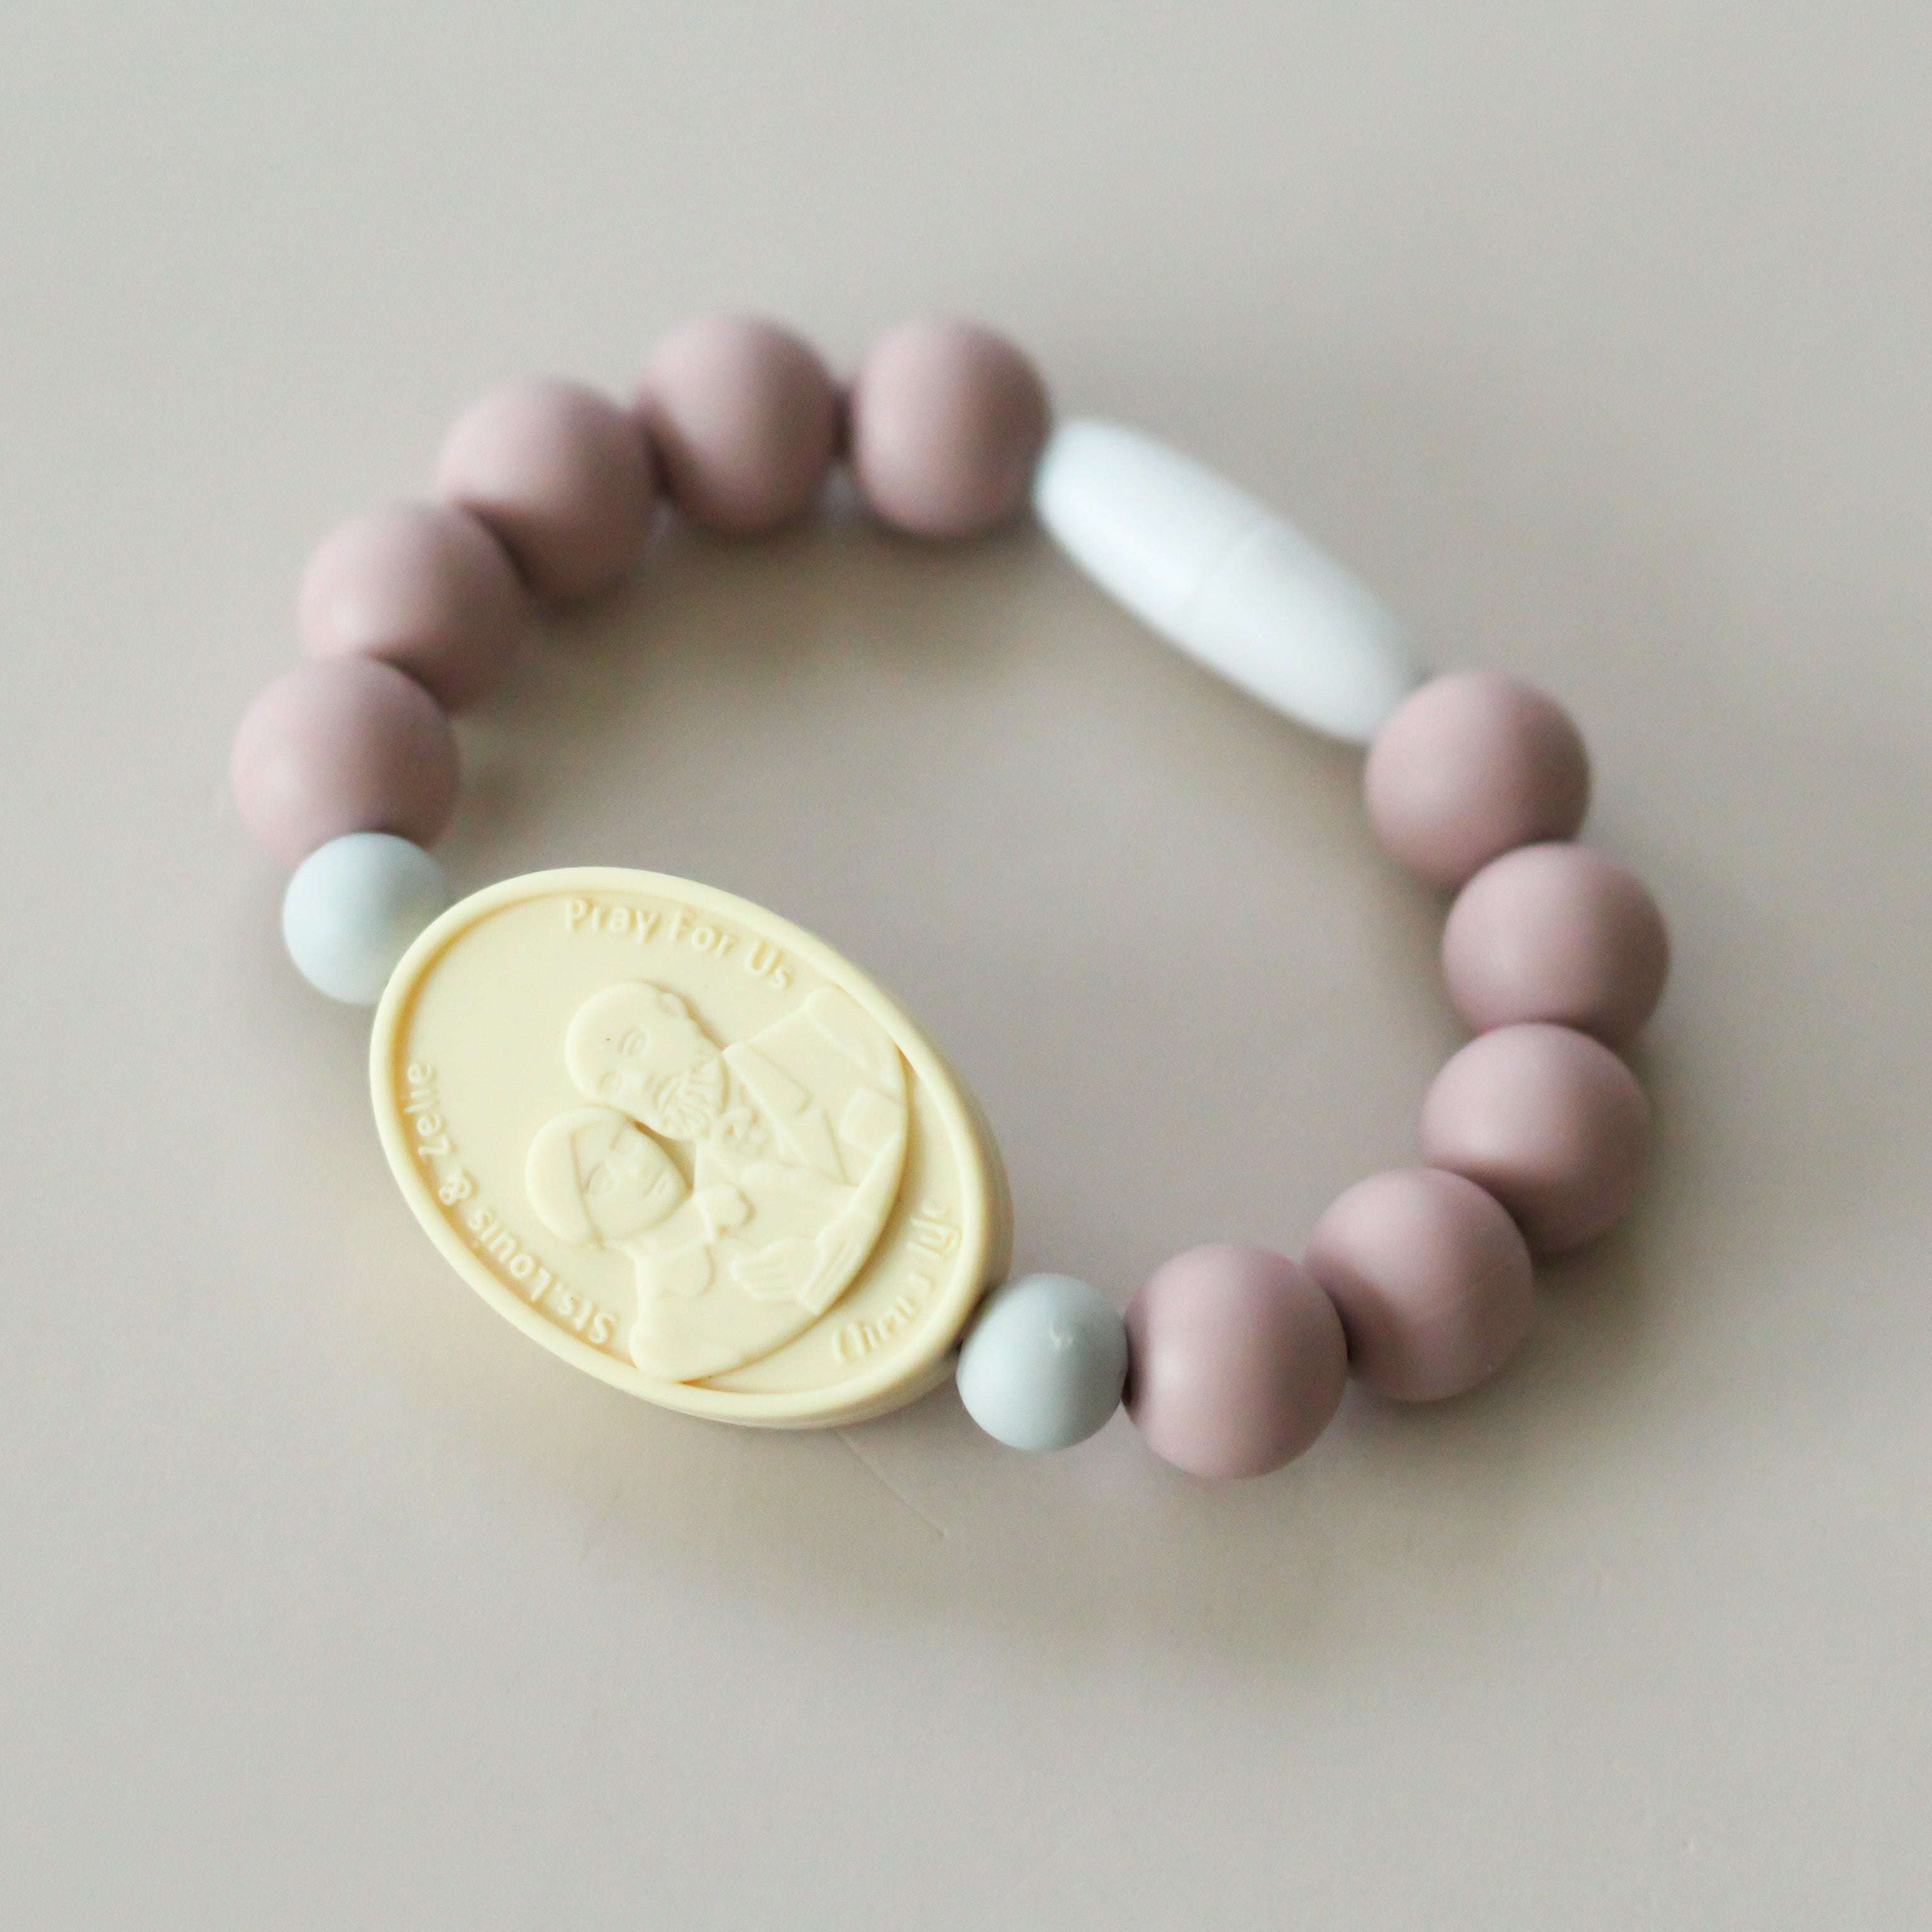 chews-life-st-therese-with-sts-zelie-and-louis-saint-bracelet-mauve-31349643903152.jpg